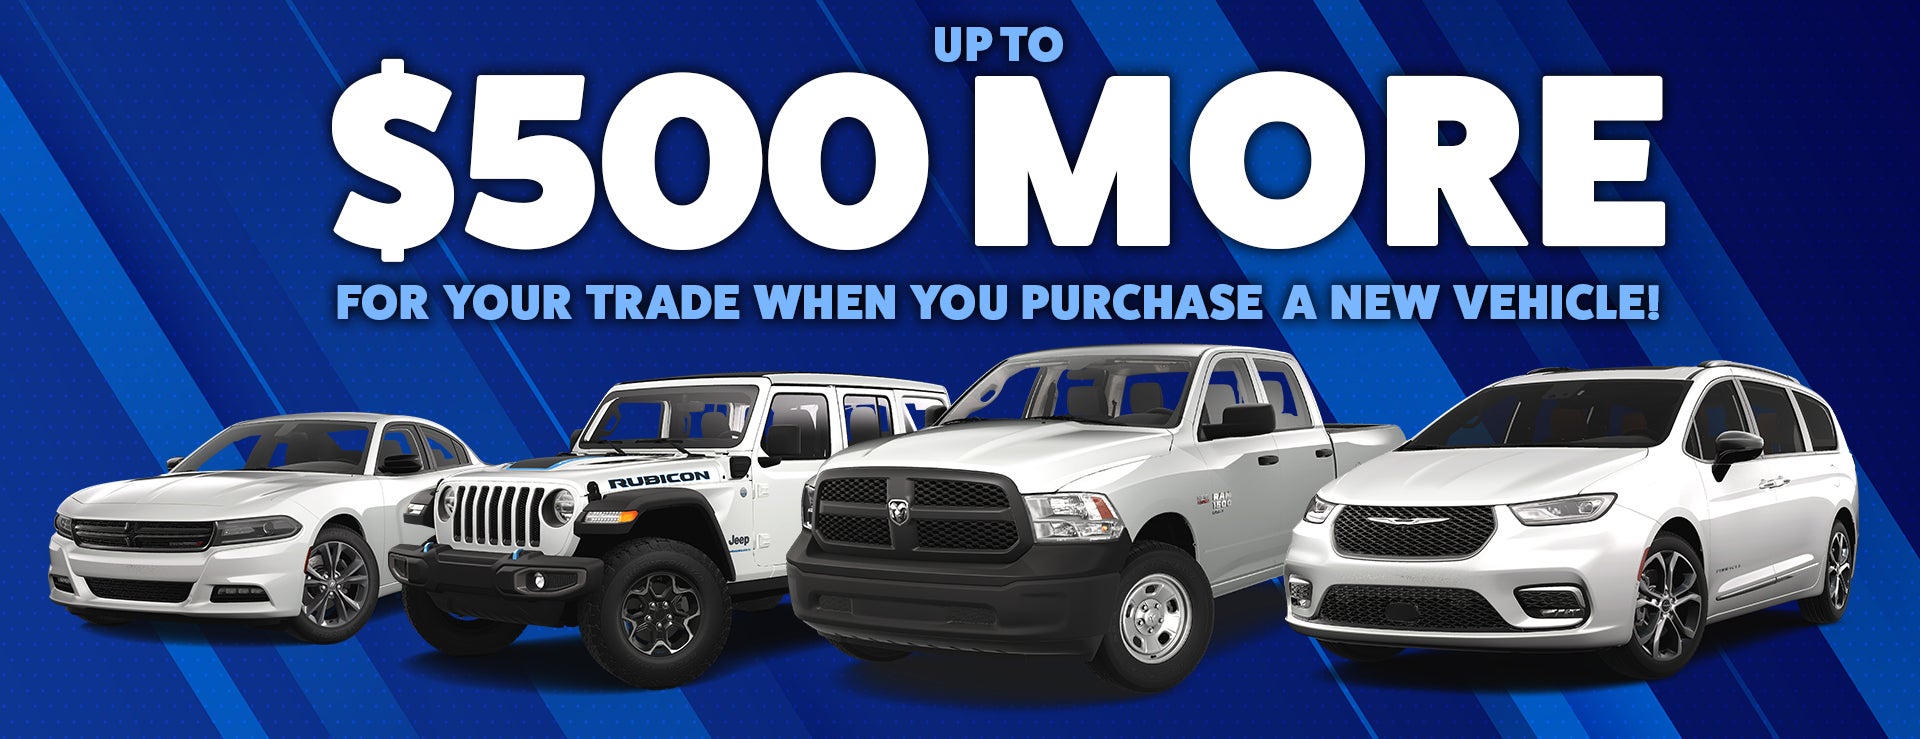 Up to $500 more trade in value banner